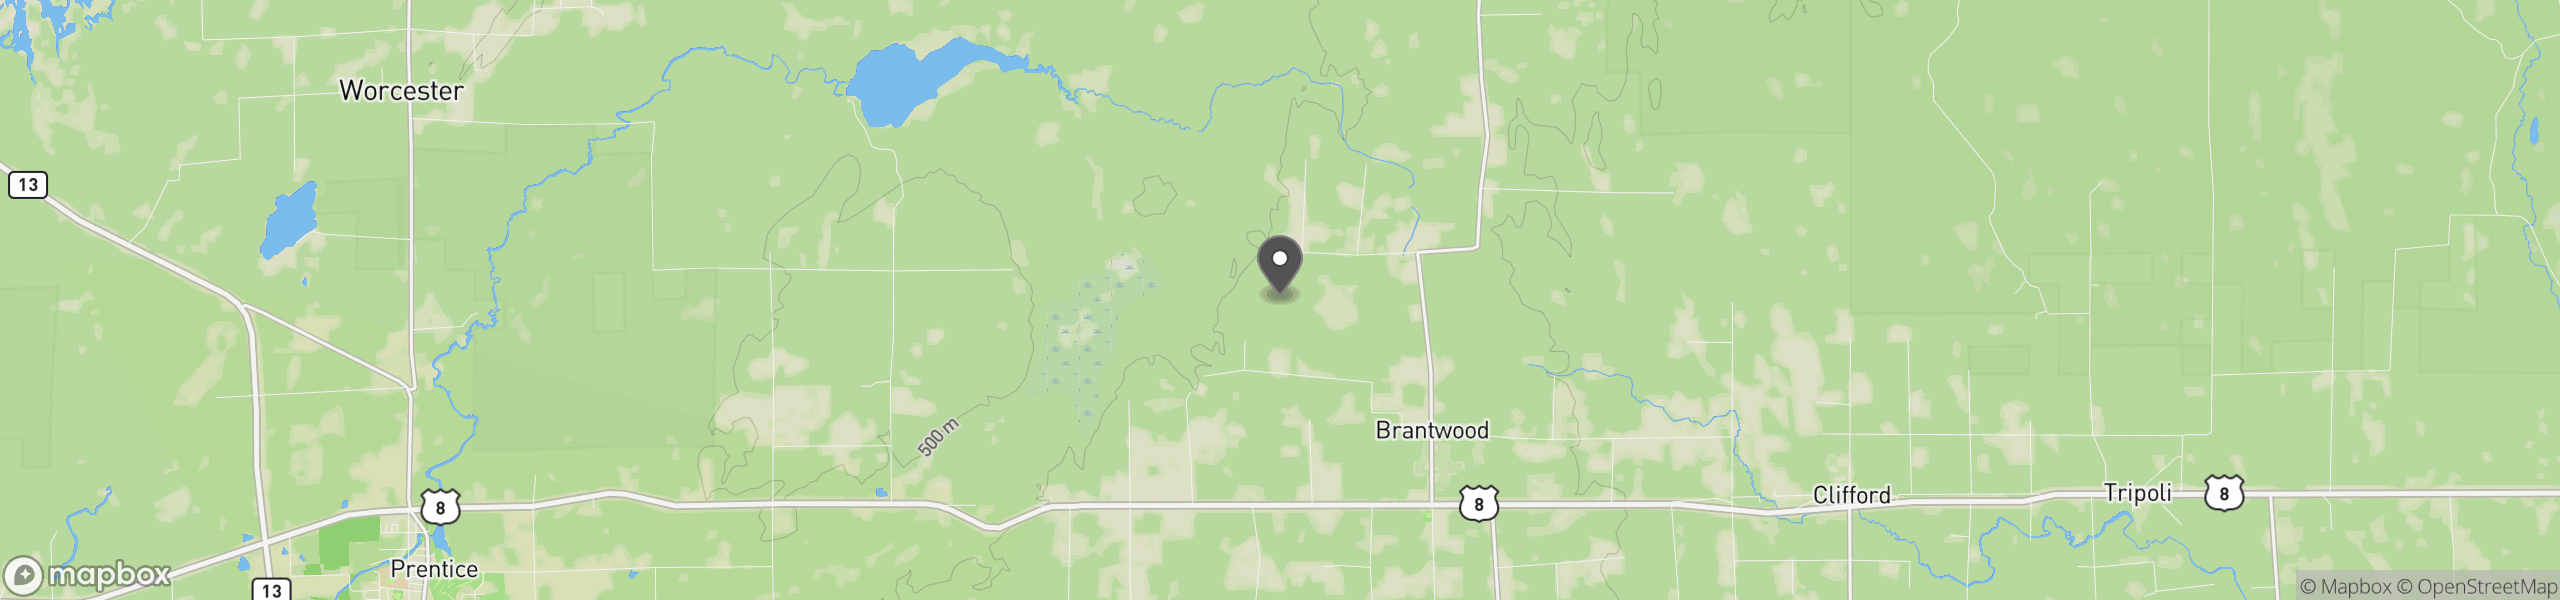 Brantwood, WI 54513